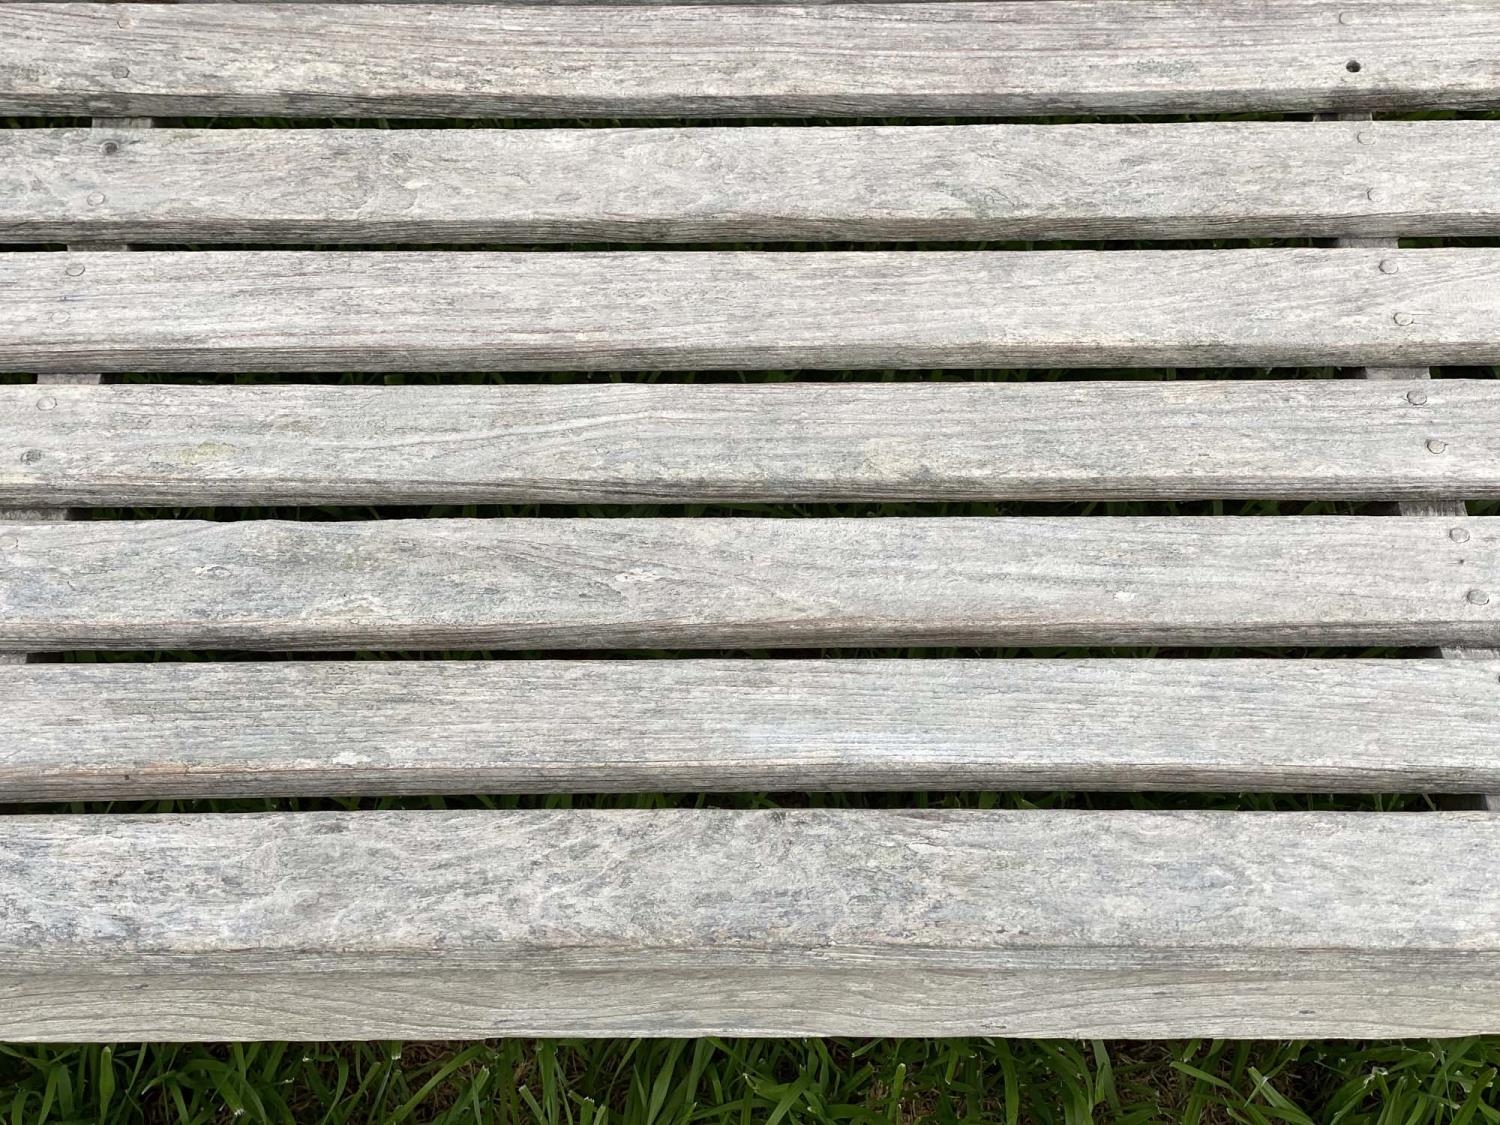 GARDEN BENCH, silvery weathered teak of slatted and pegged construction, 180cm W. - Image 4 of 4